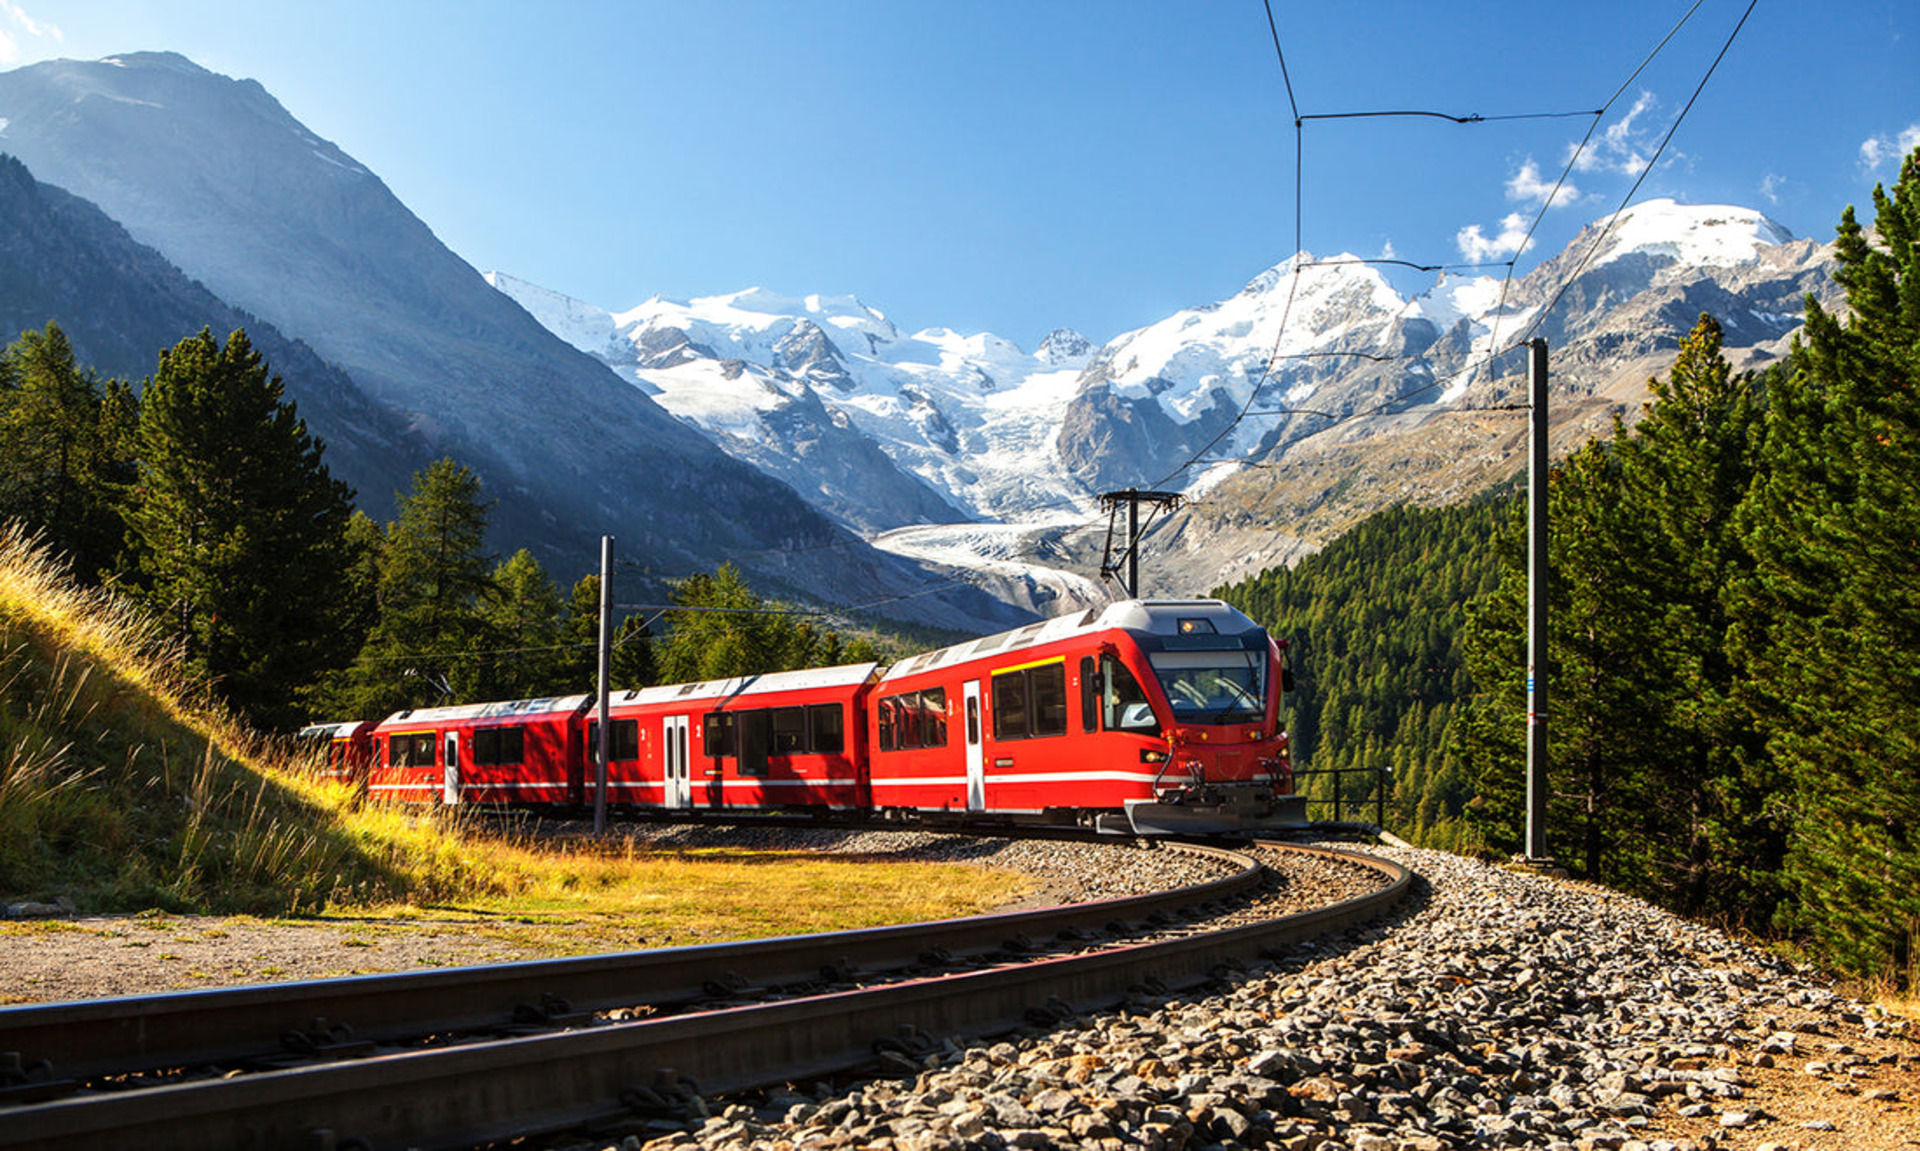 Europe by Train: 20 Itinerary Ideas for 10 Days of Travel